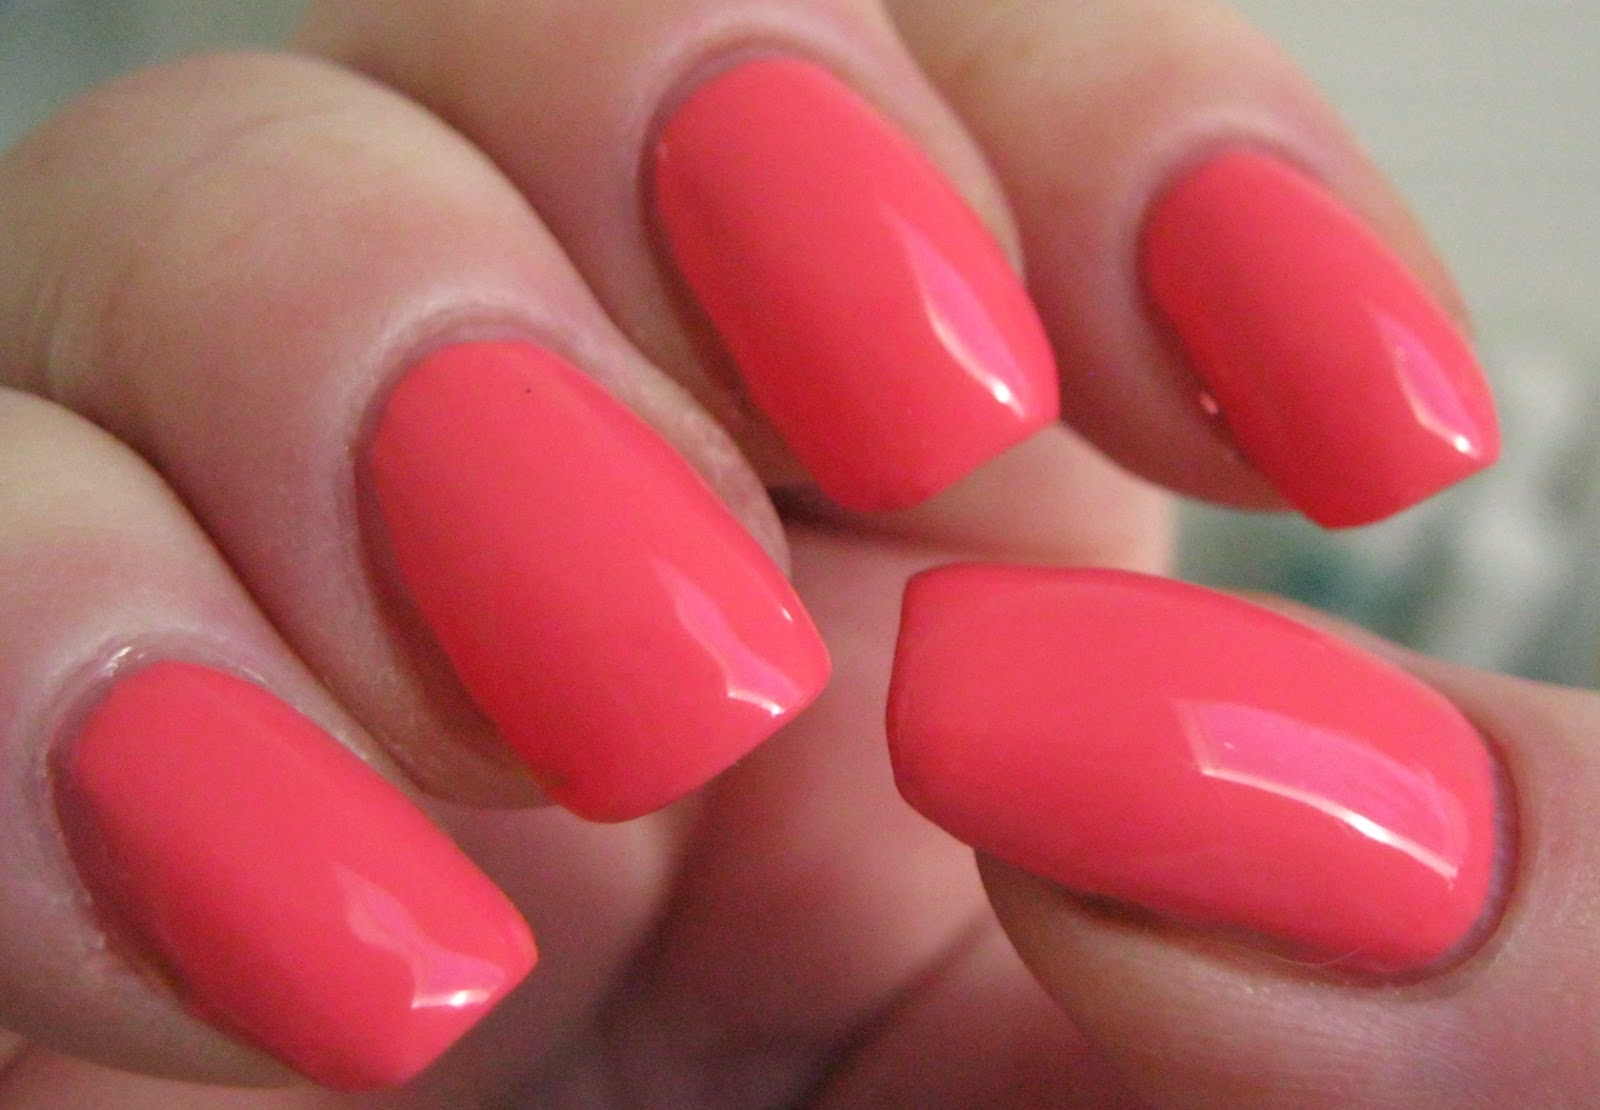 10. Butter London Nail Lacquer in "Trout Pout" - wide 8